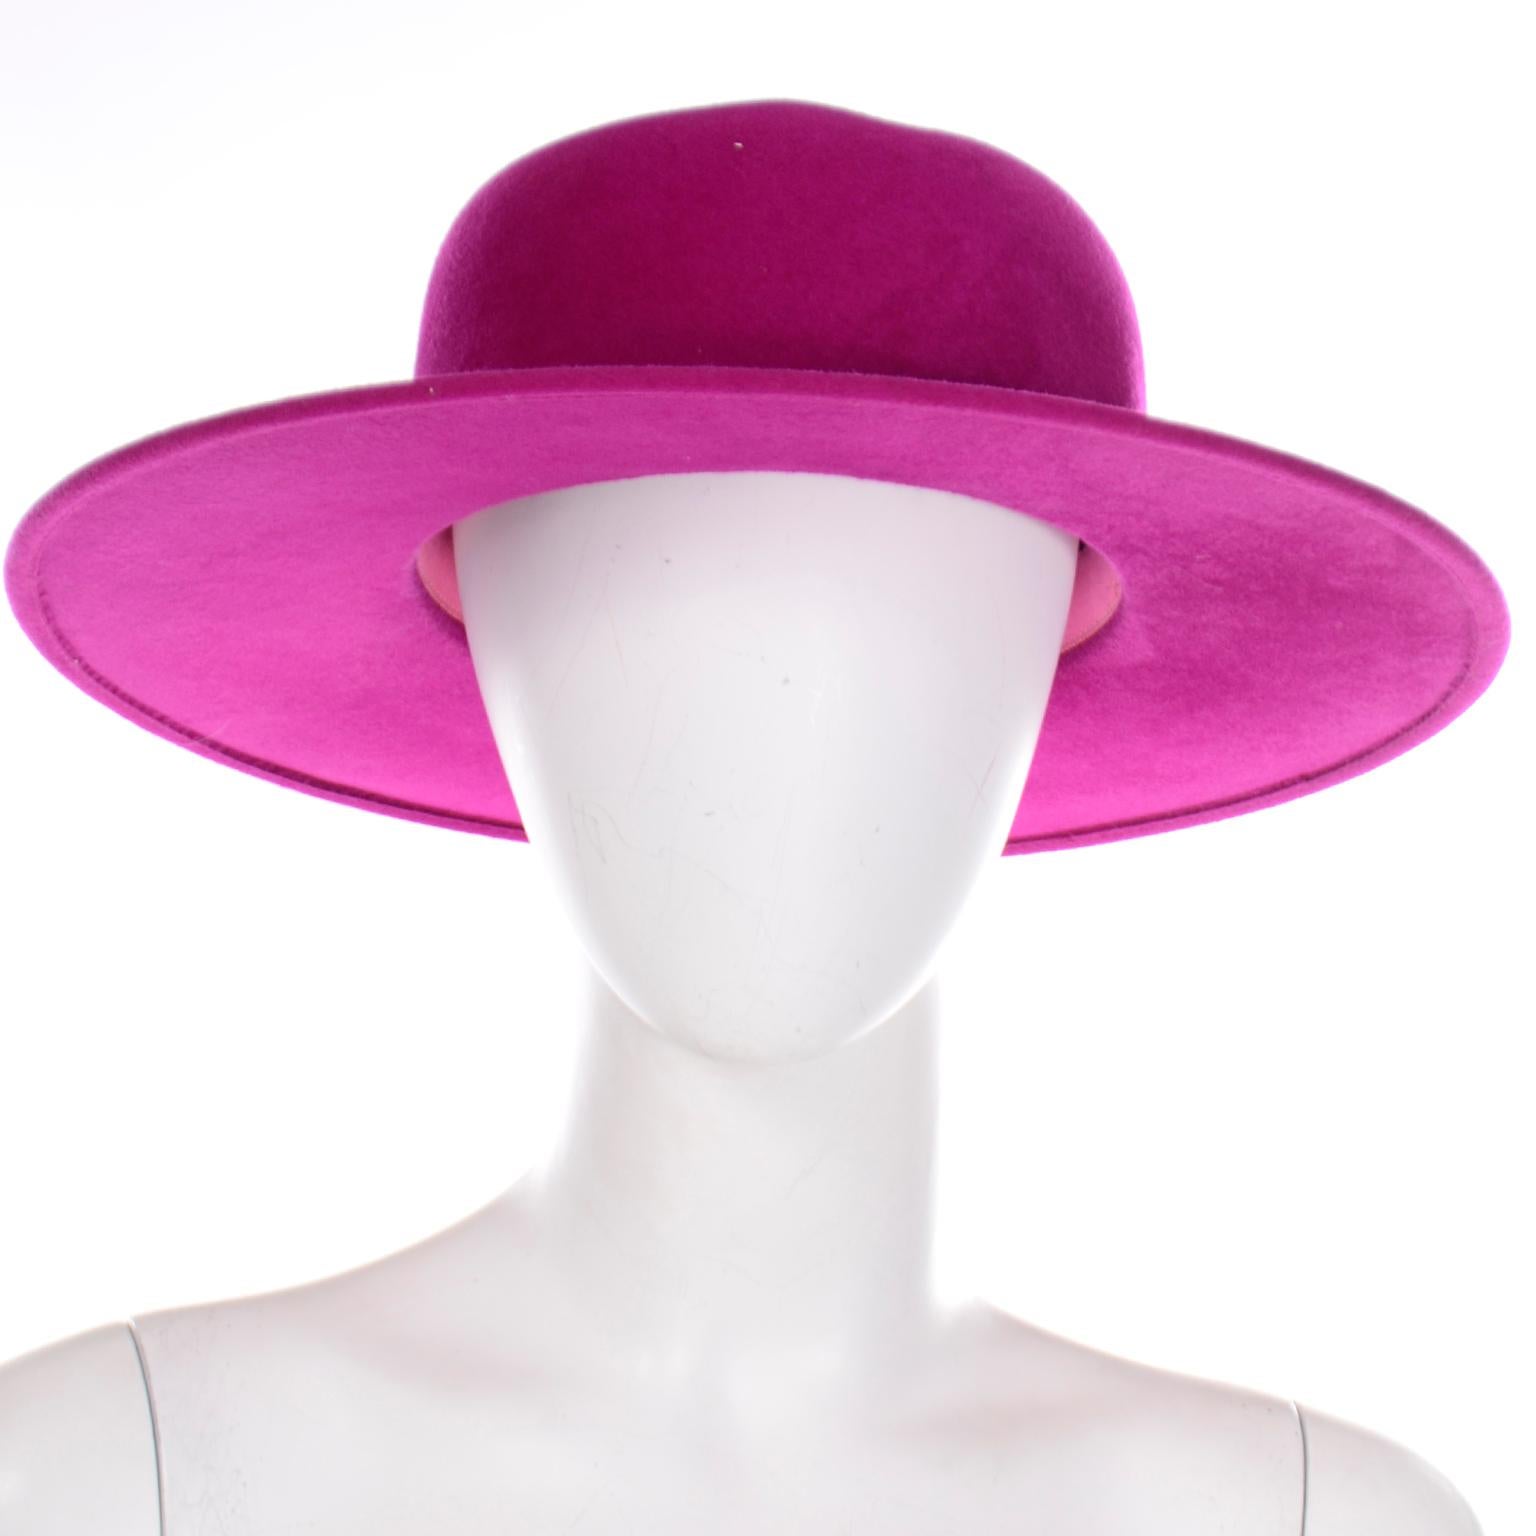 This pretty vintage magenta pink felted wool hat was designed by Frank Olive and has the I Magnin store label. This beautiful hat is so beautifully made and we love hats that have a nice brim! This would be a great hat to wear to any Spring event